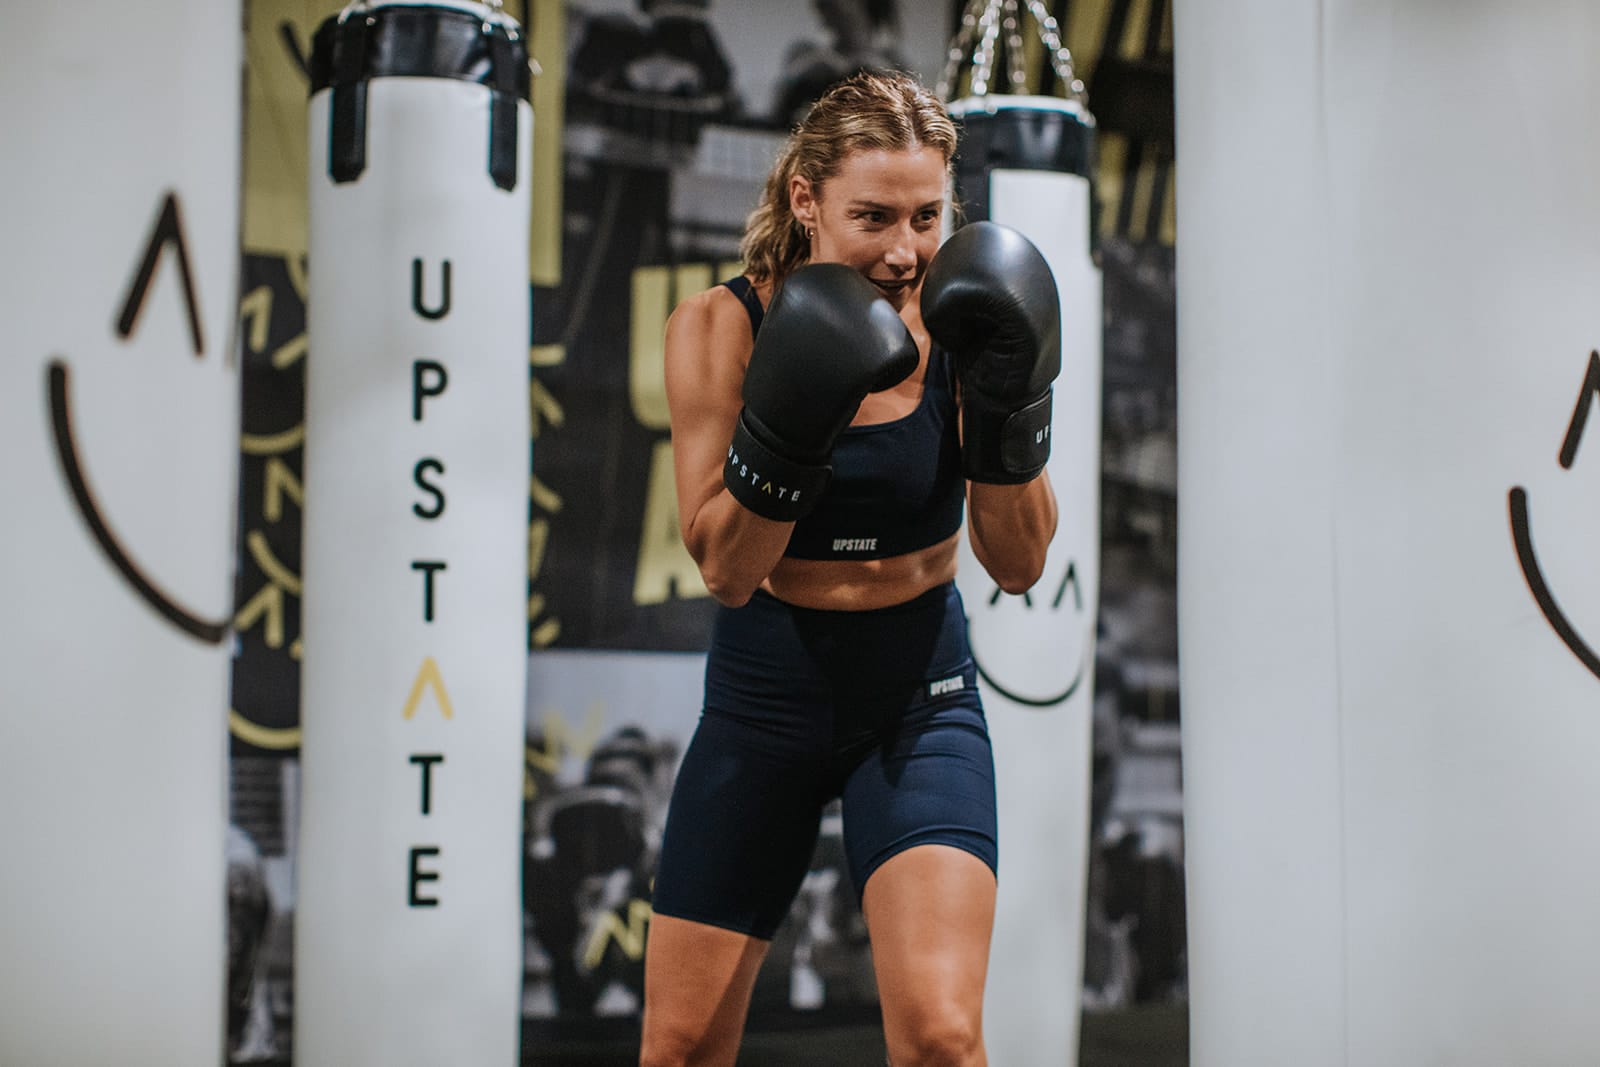 Woman wears boxing gloves as she punches boxing bag in Upstate Studio's unique boxing room. Background is a motivating graphic wall with positive images.